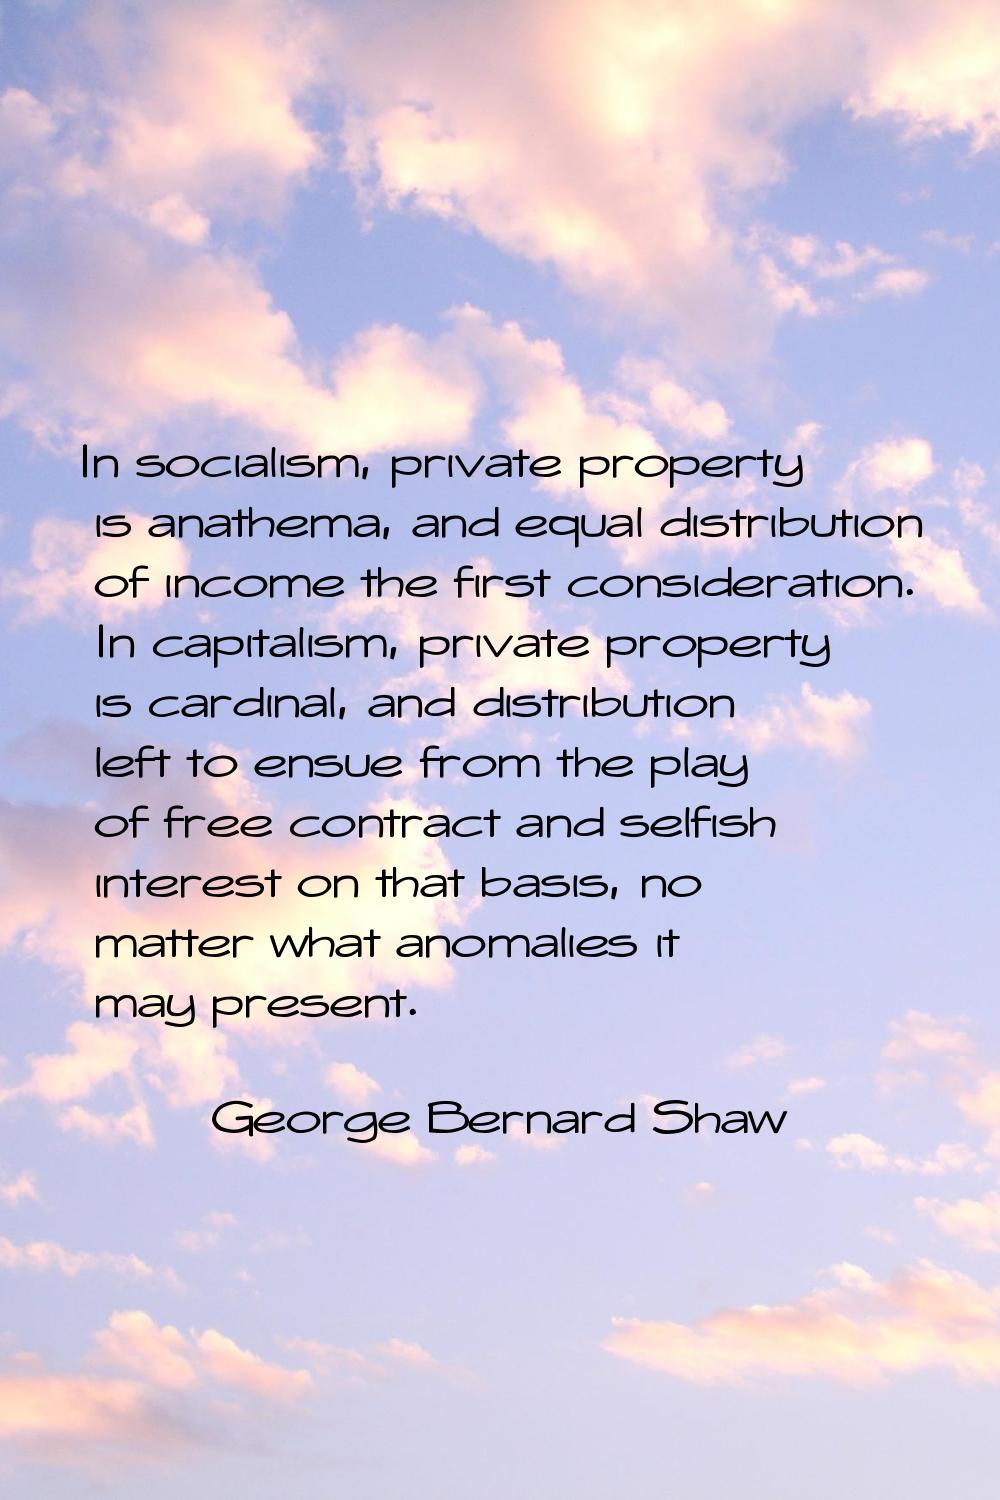 In socialism, private property is anathema, and equal distribution of income the first consideratio